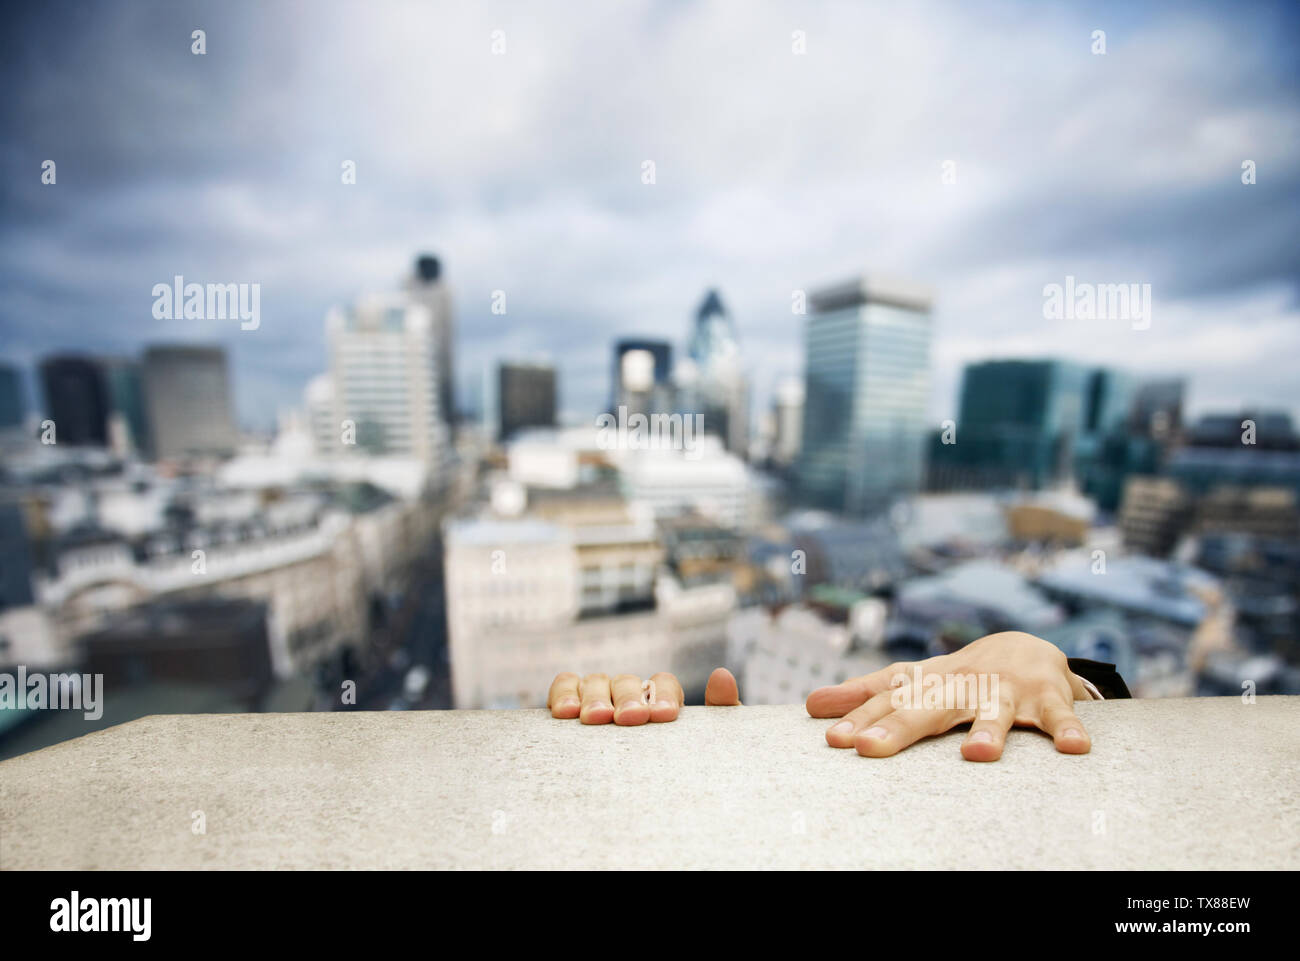 Man clambering onto the roof of a building Stock Photo